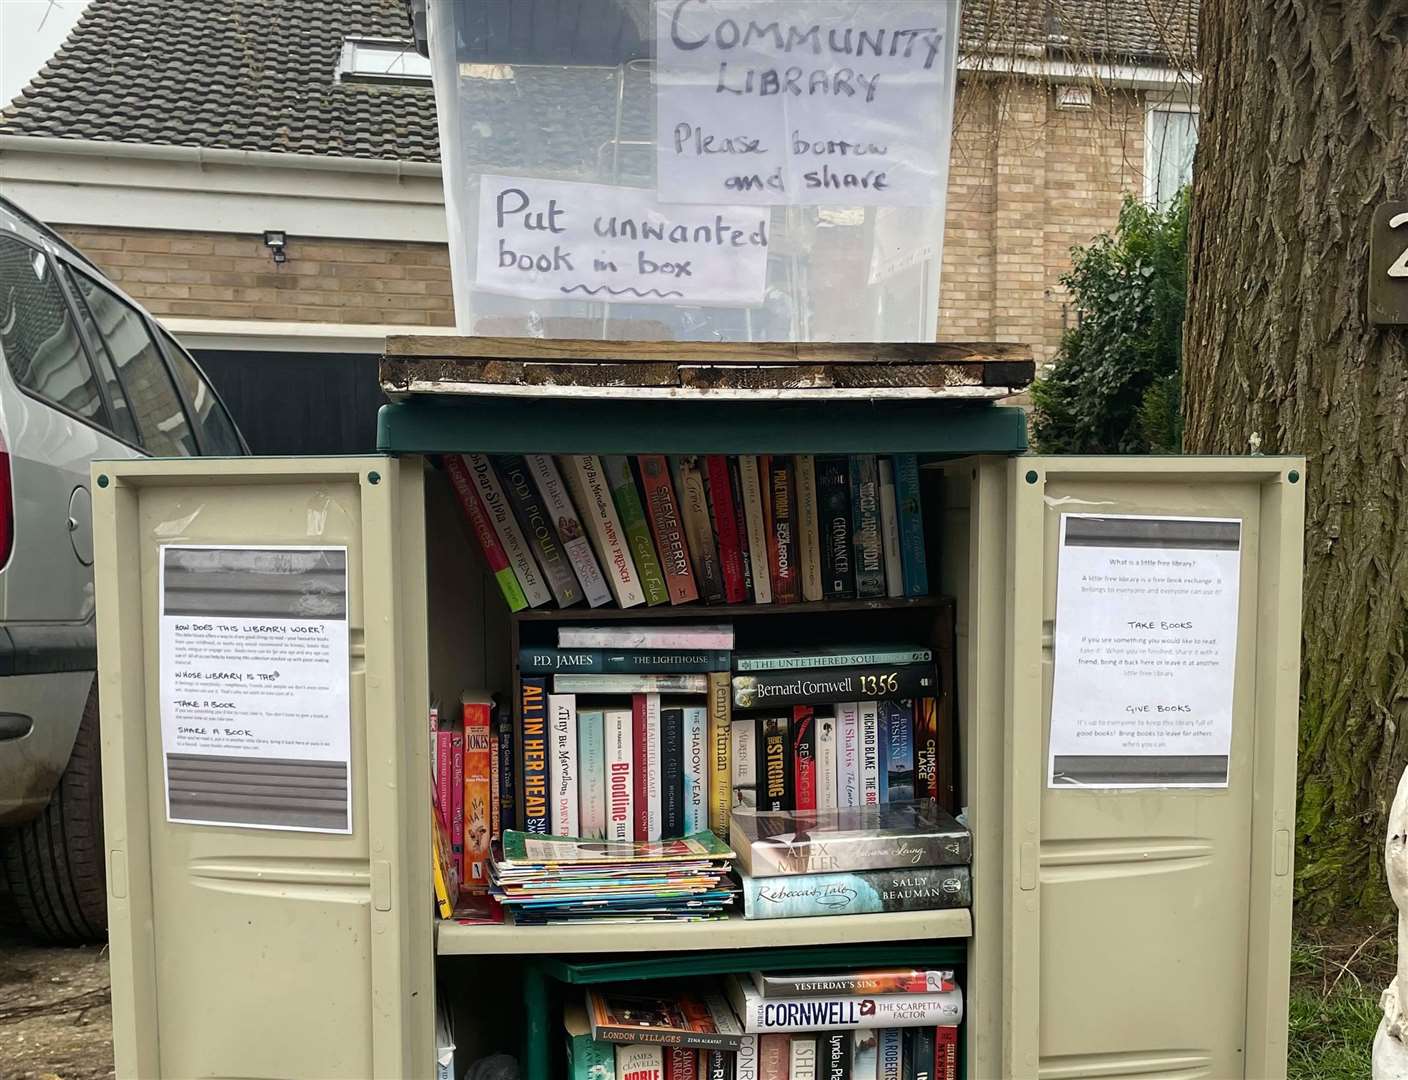 The mini library is for the community to use